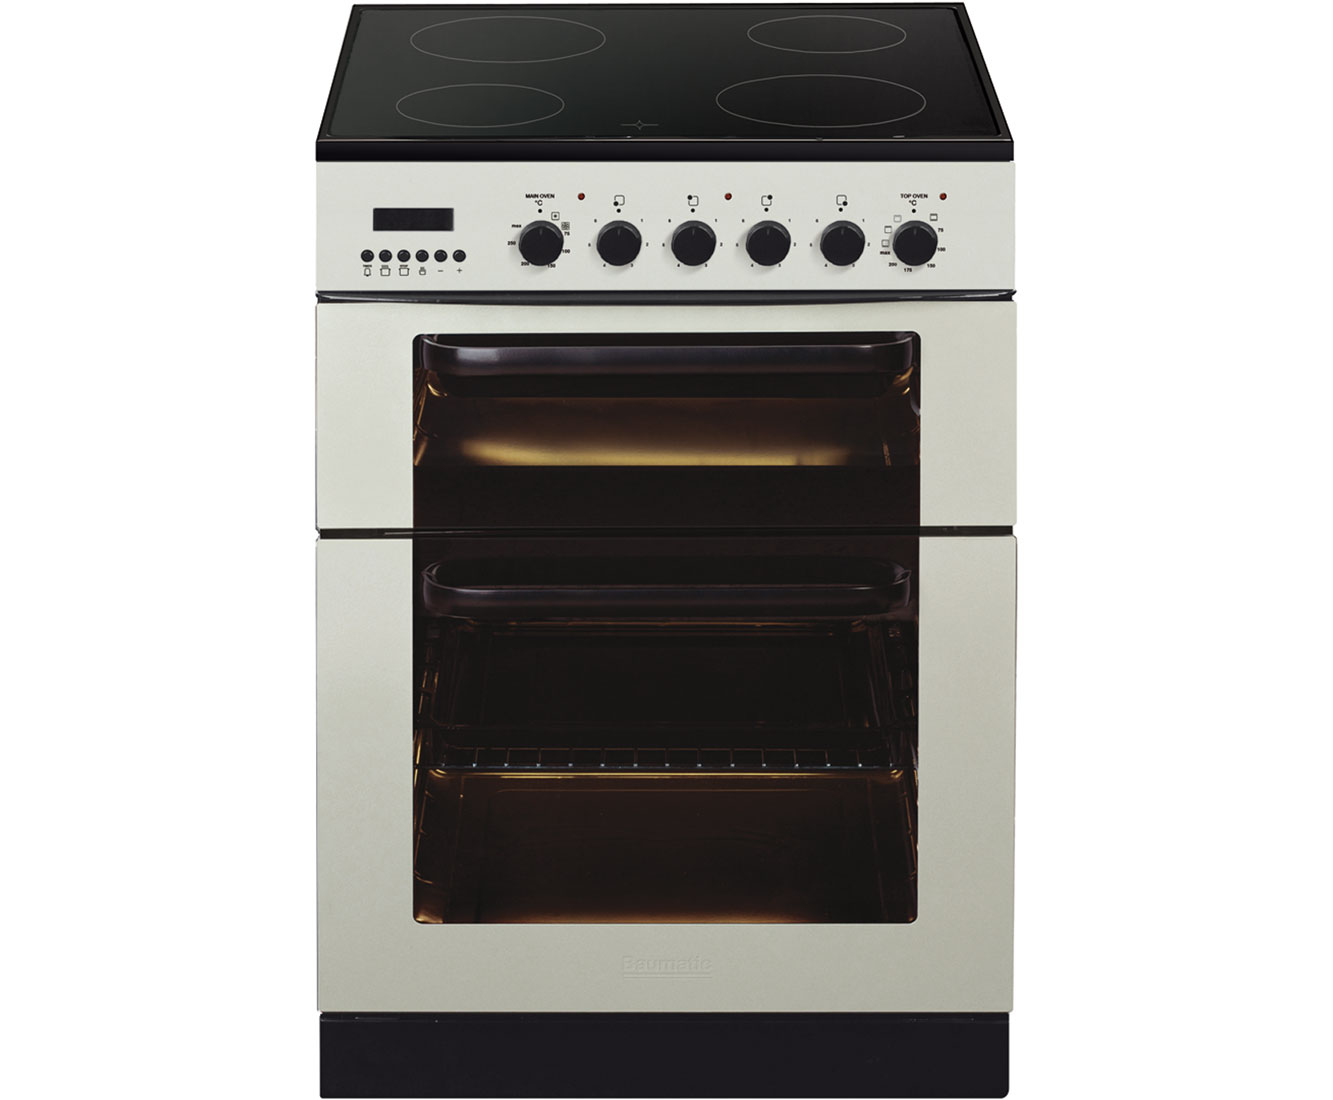 Baumatic BCE625IV Free Standing Cooker in Ivory